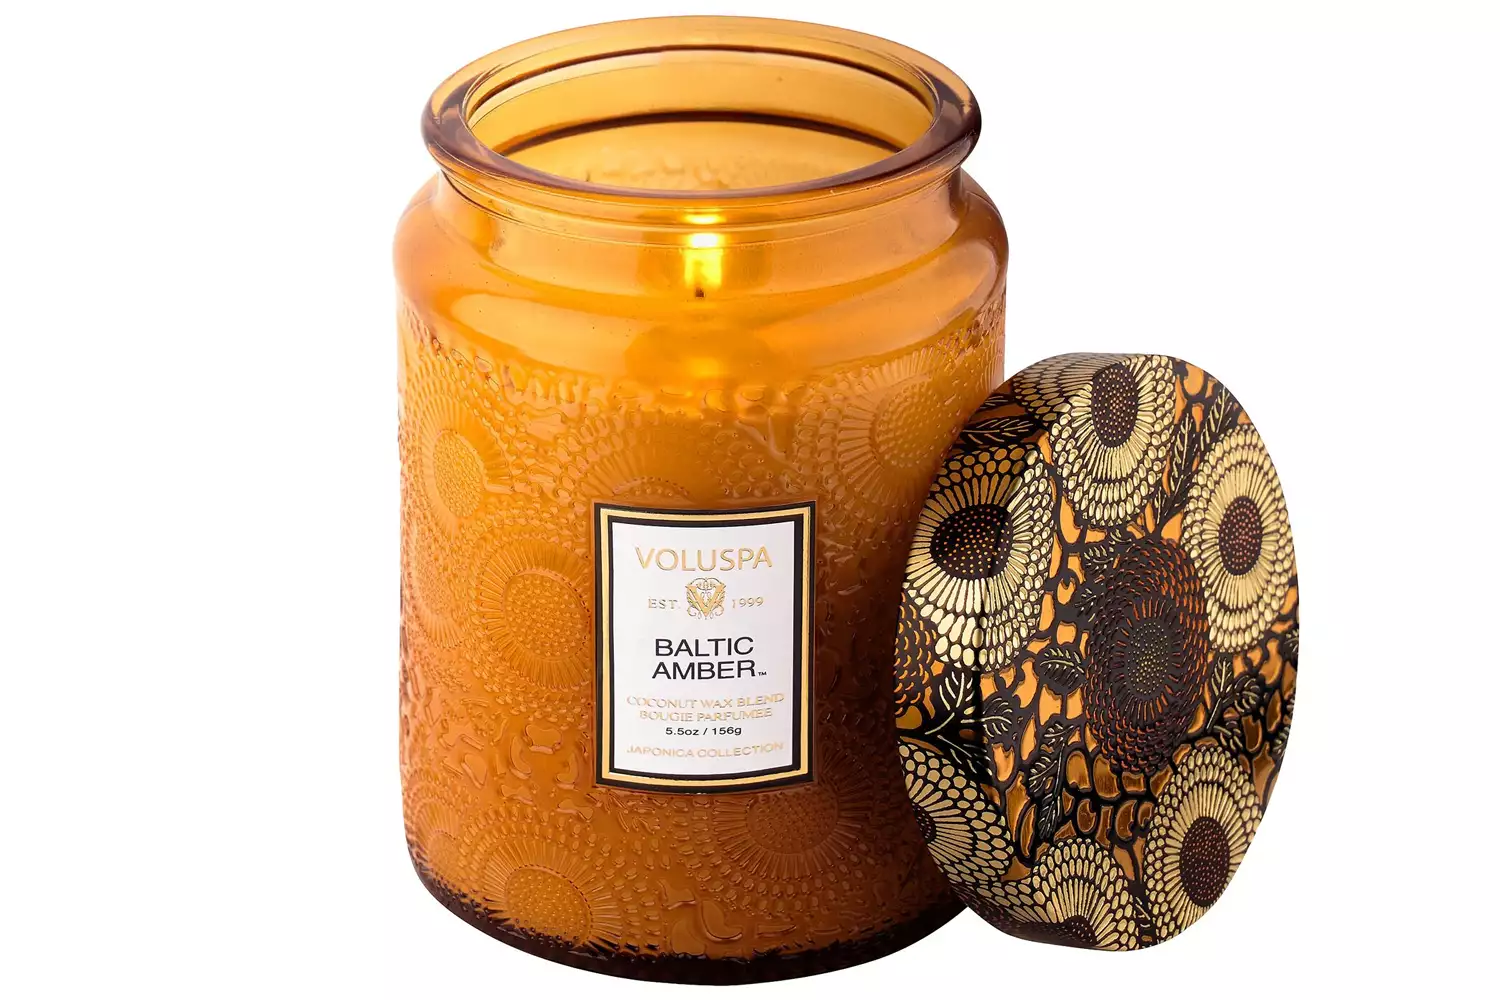 Voluspa Baltic Amber Petite Embossed Glass Candle